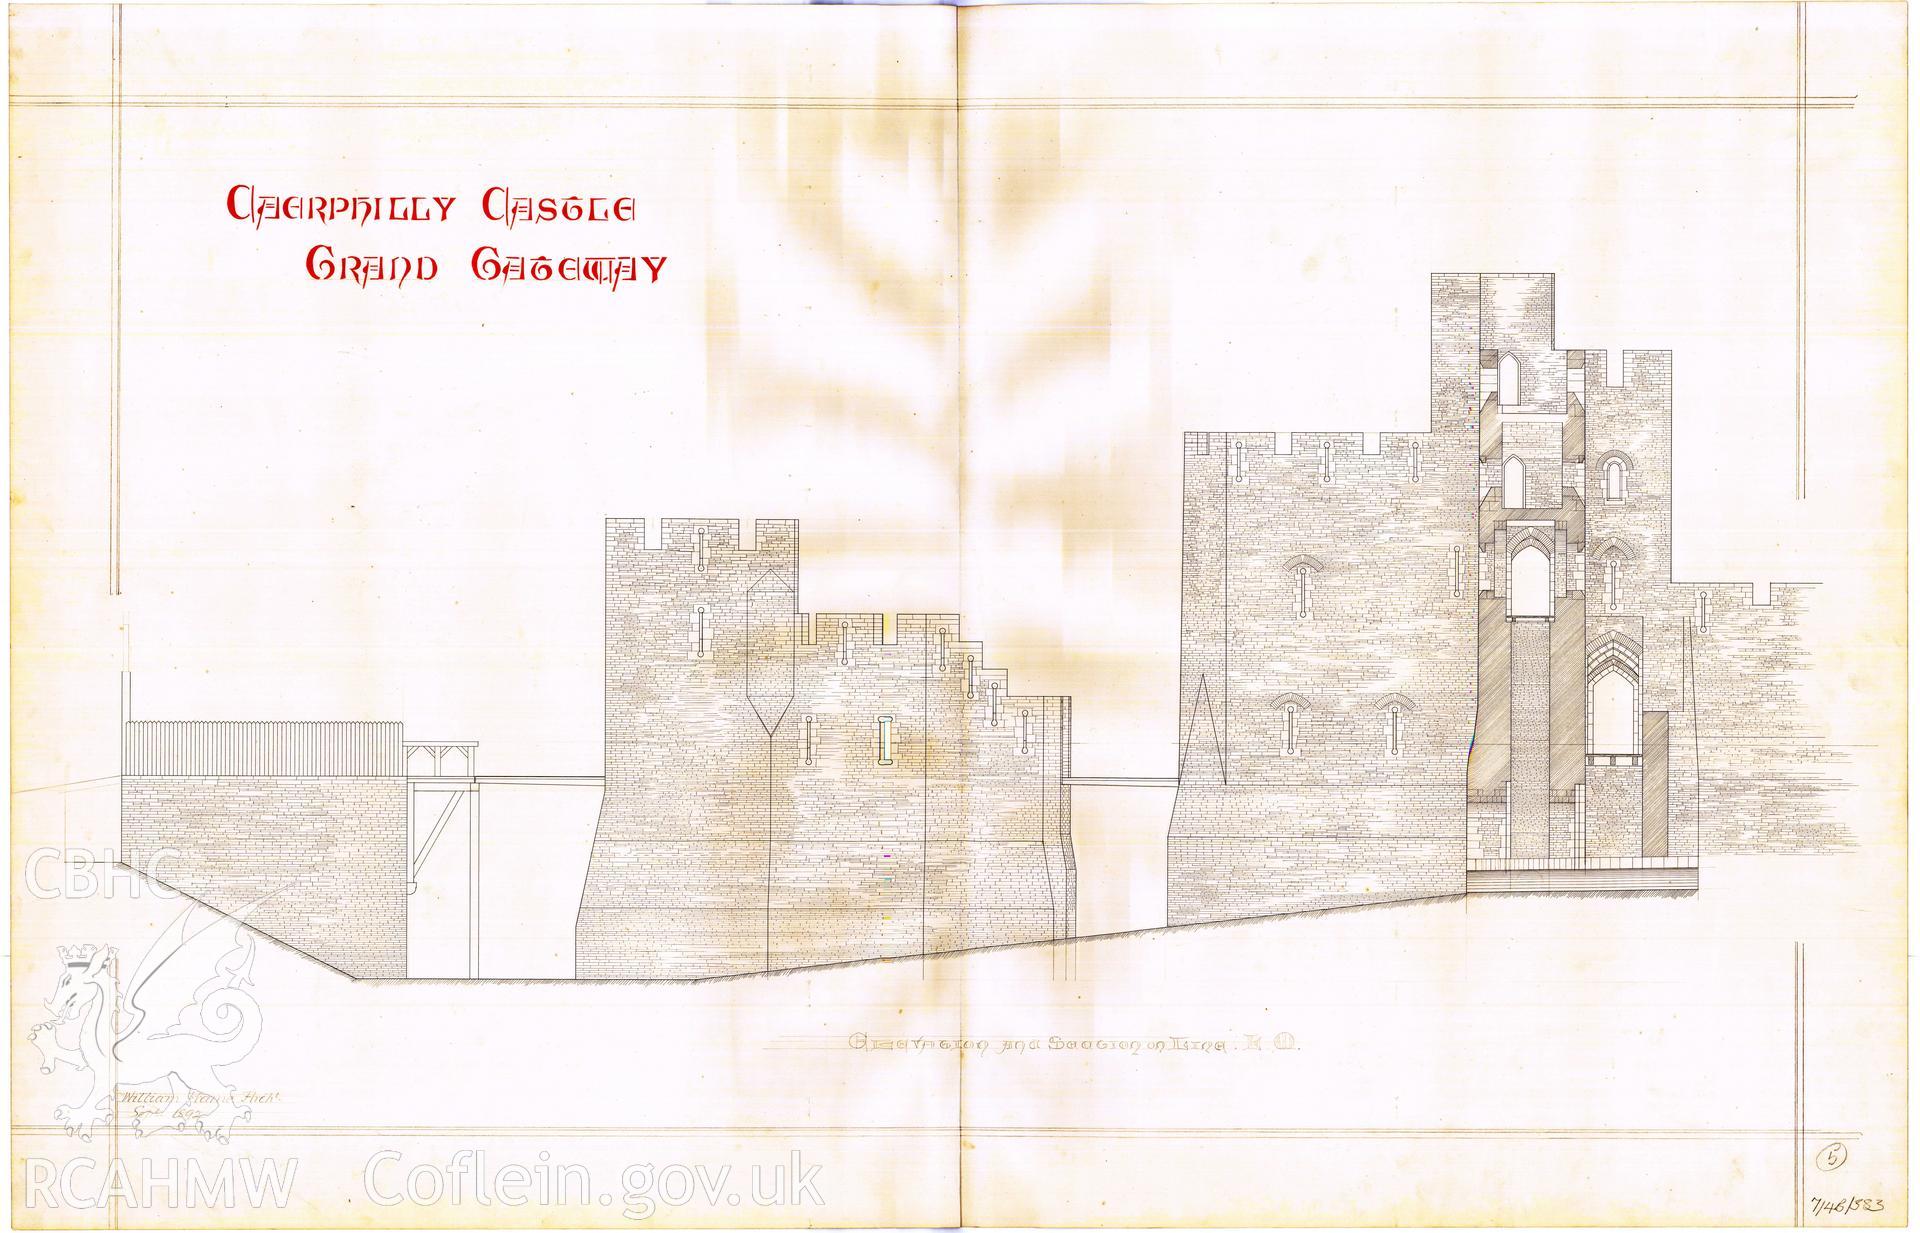 Cadw guardianship monument drawing of Caerphilly Castle. Grand Gateway Elevations & Section. Cadw Ref. No:714B/383. Scale 1:96.